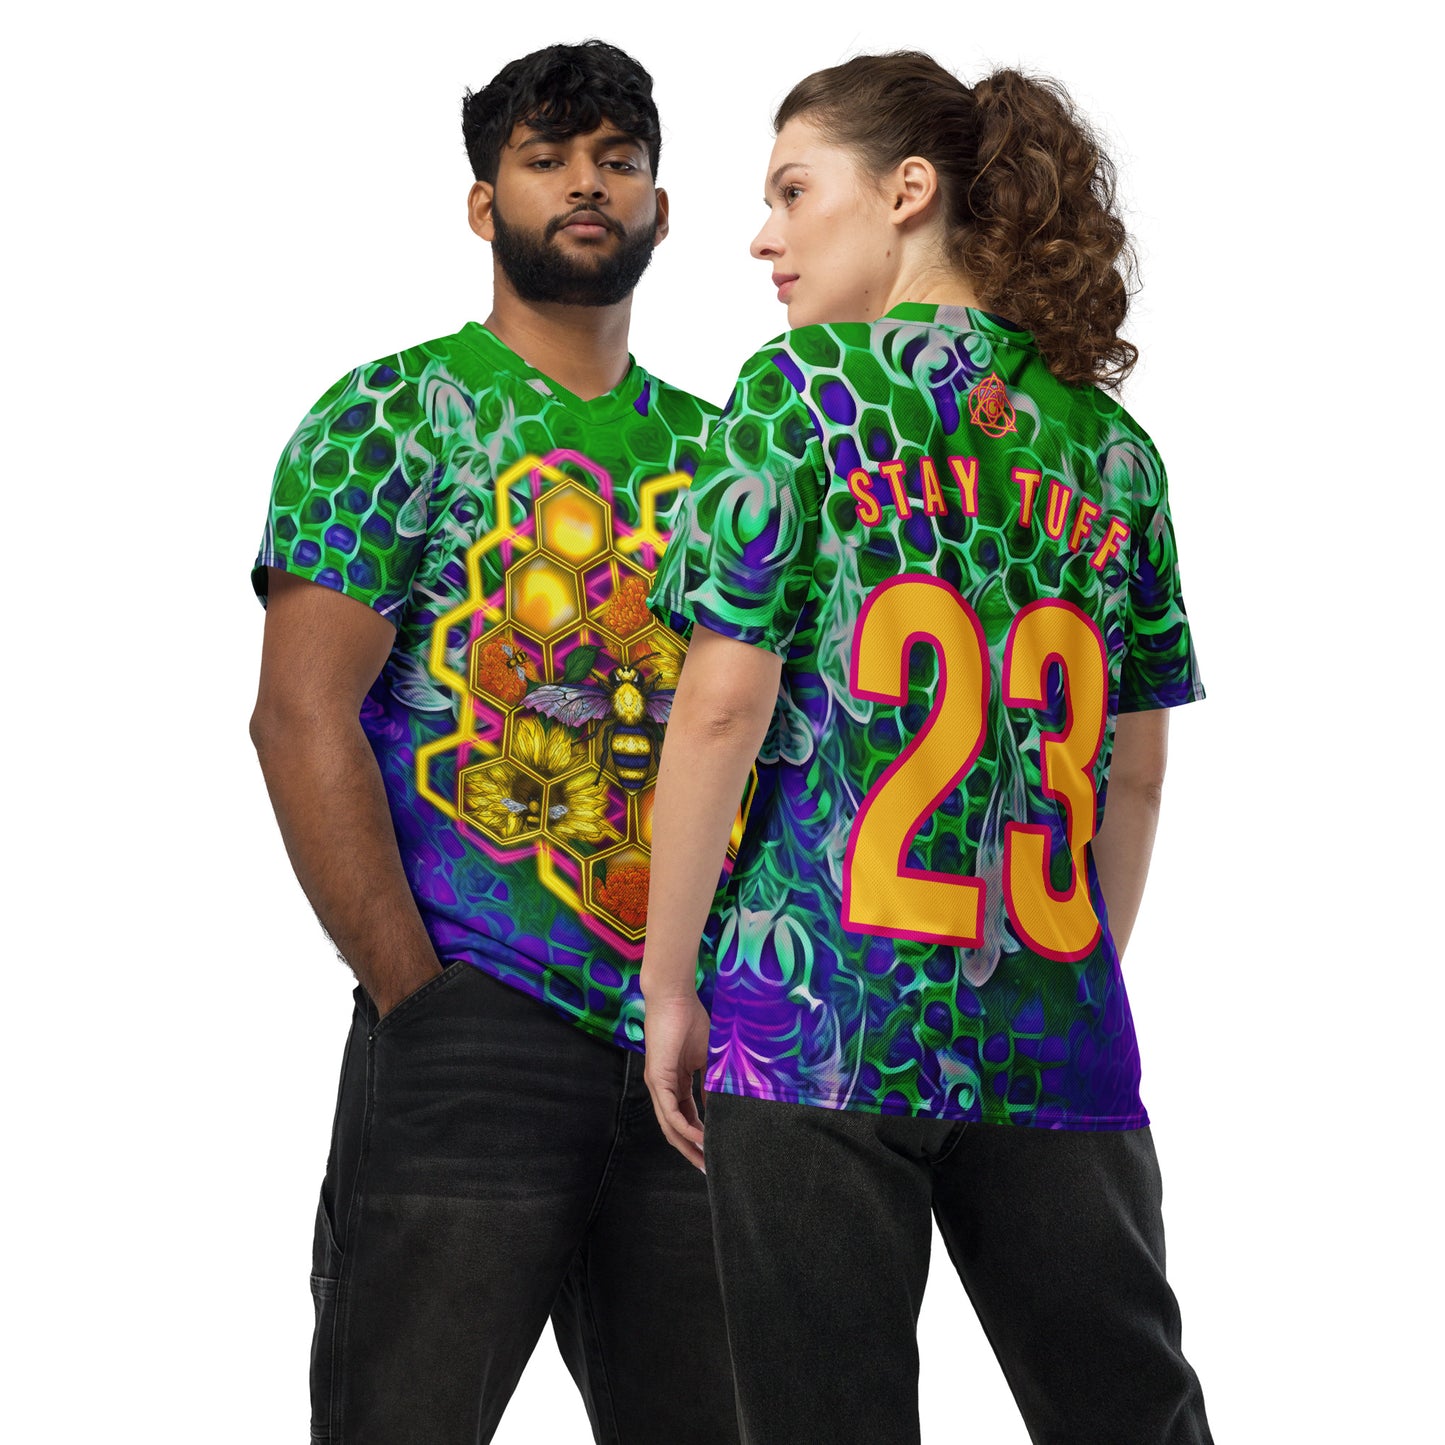 BEEHIVE (Electric Forest Exclusive Unisex Sports Jersey)